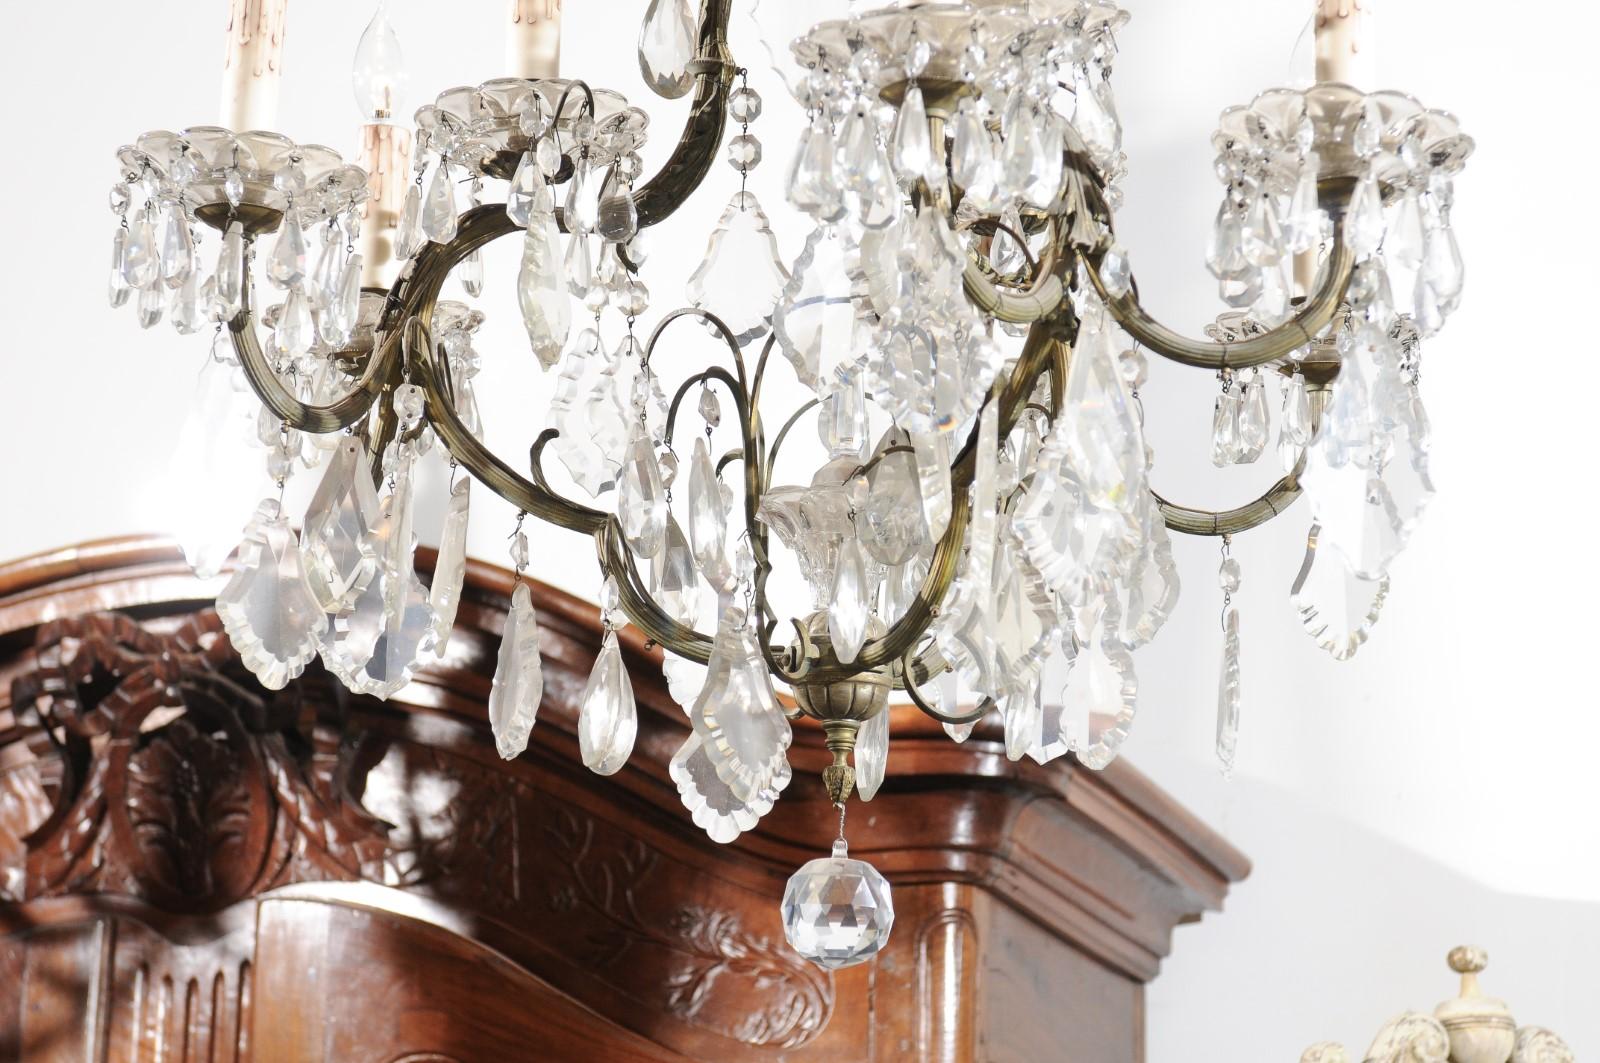 French Eight-Light Crystal Chandelier with Iron Armature from the 19th Century For Sale 1